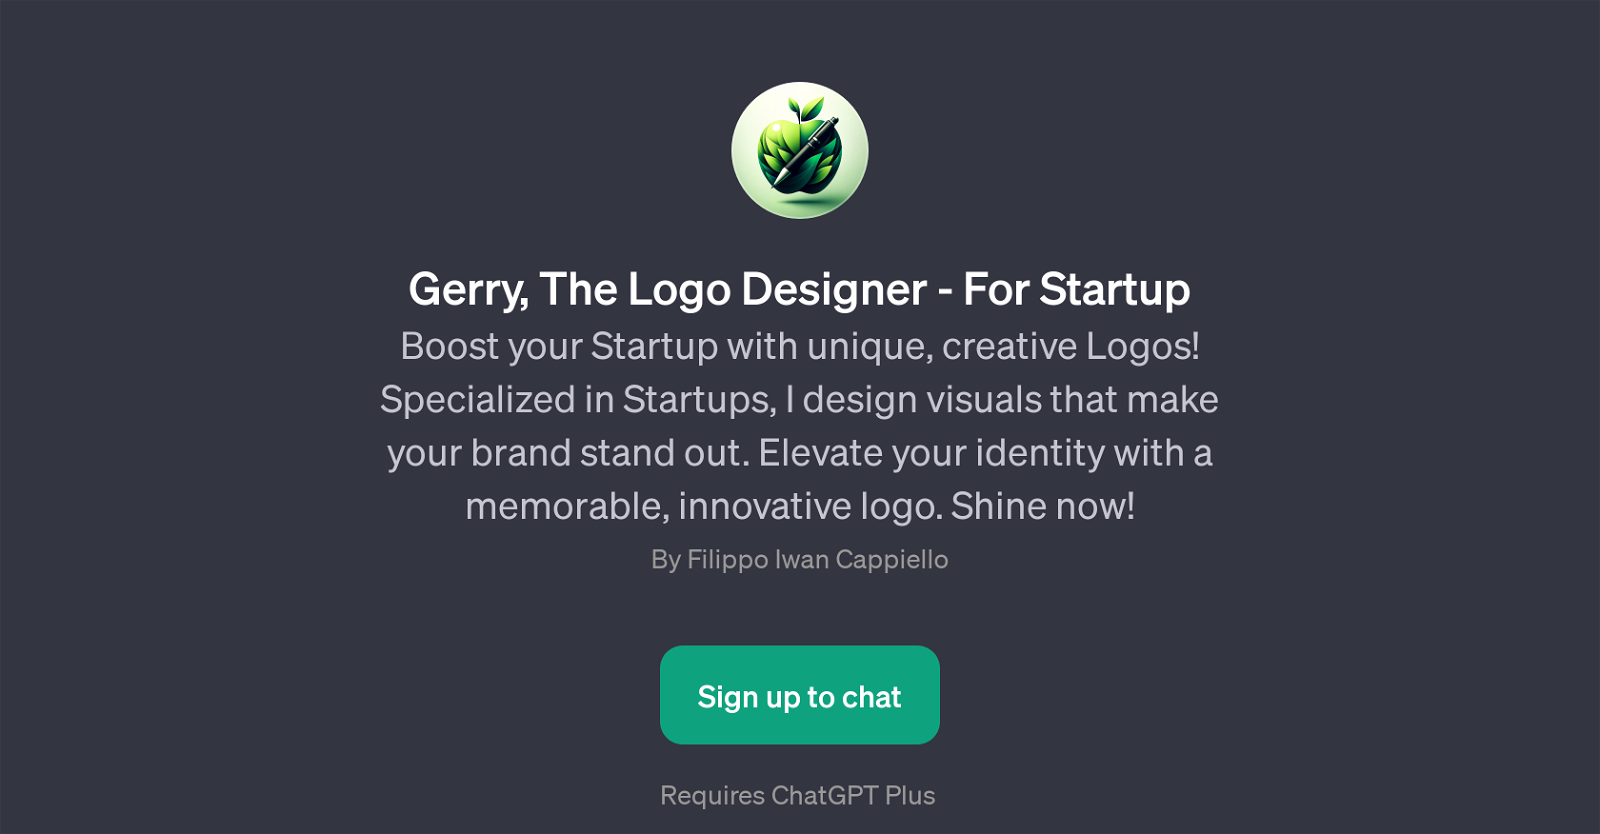 https://media.theresanaiforthat.com/gerry-the-logo-designer-for-startup.png